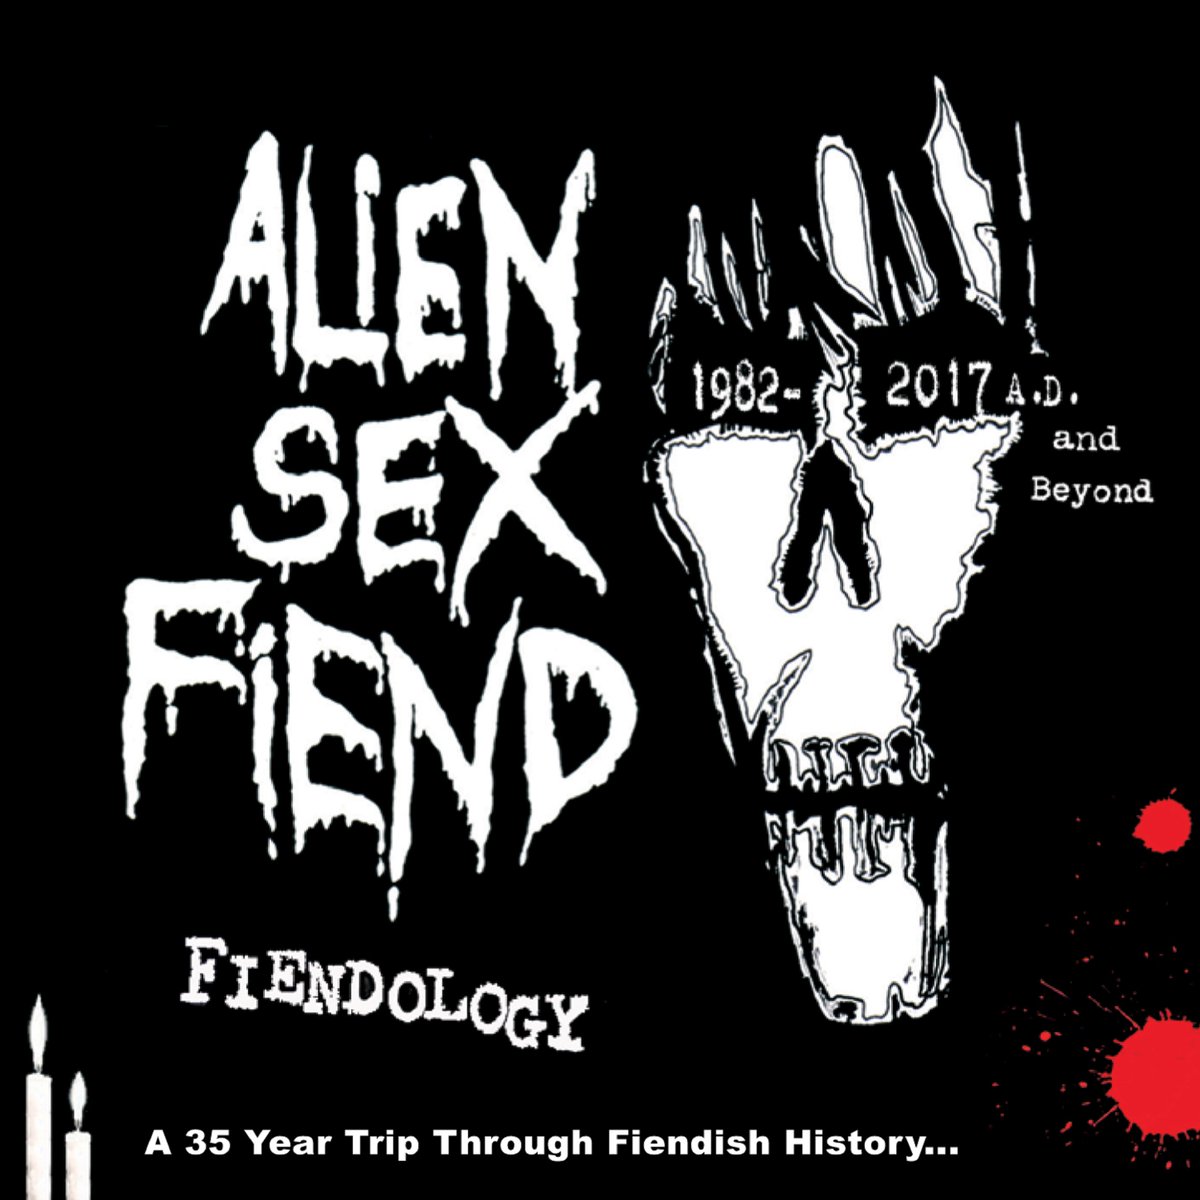 #AlienSexFiend 'Dead And Re-Buried' & 'R.I.P. (Blue Crumb Truck)',
from compilation
'#Fiendology'
during
#GaryWatts' #ThreeOriginalsByEach feature

#ColinSpencer Programme #101
▶️mixcloud.com/ColinSpencer/c…

#DiscoverAndRemember @AlienSexFiendHQ

🙏 @natureofwires' Gary

🚨 @ASF_1982